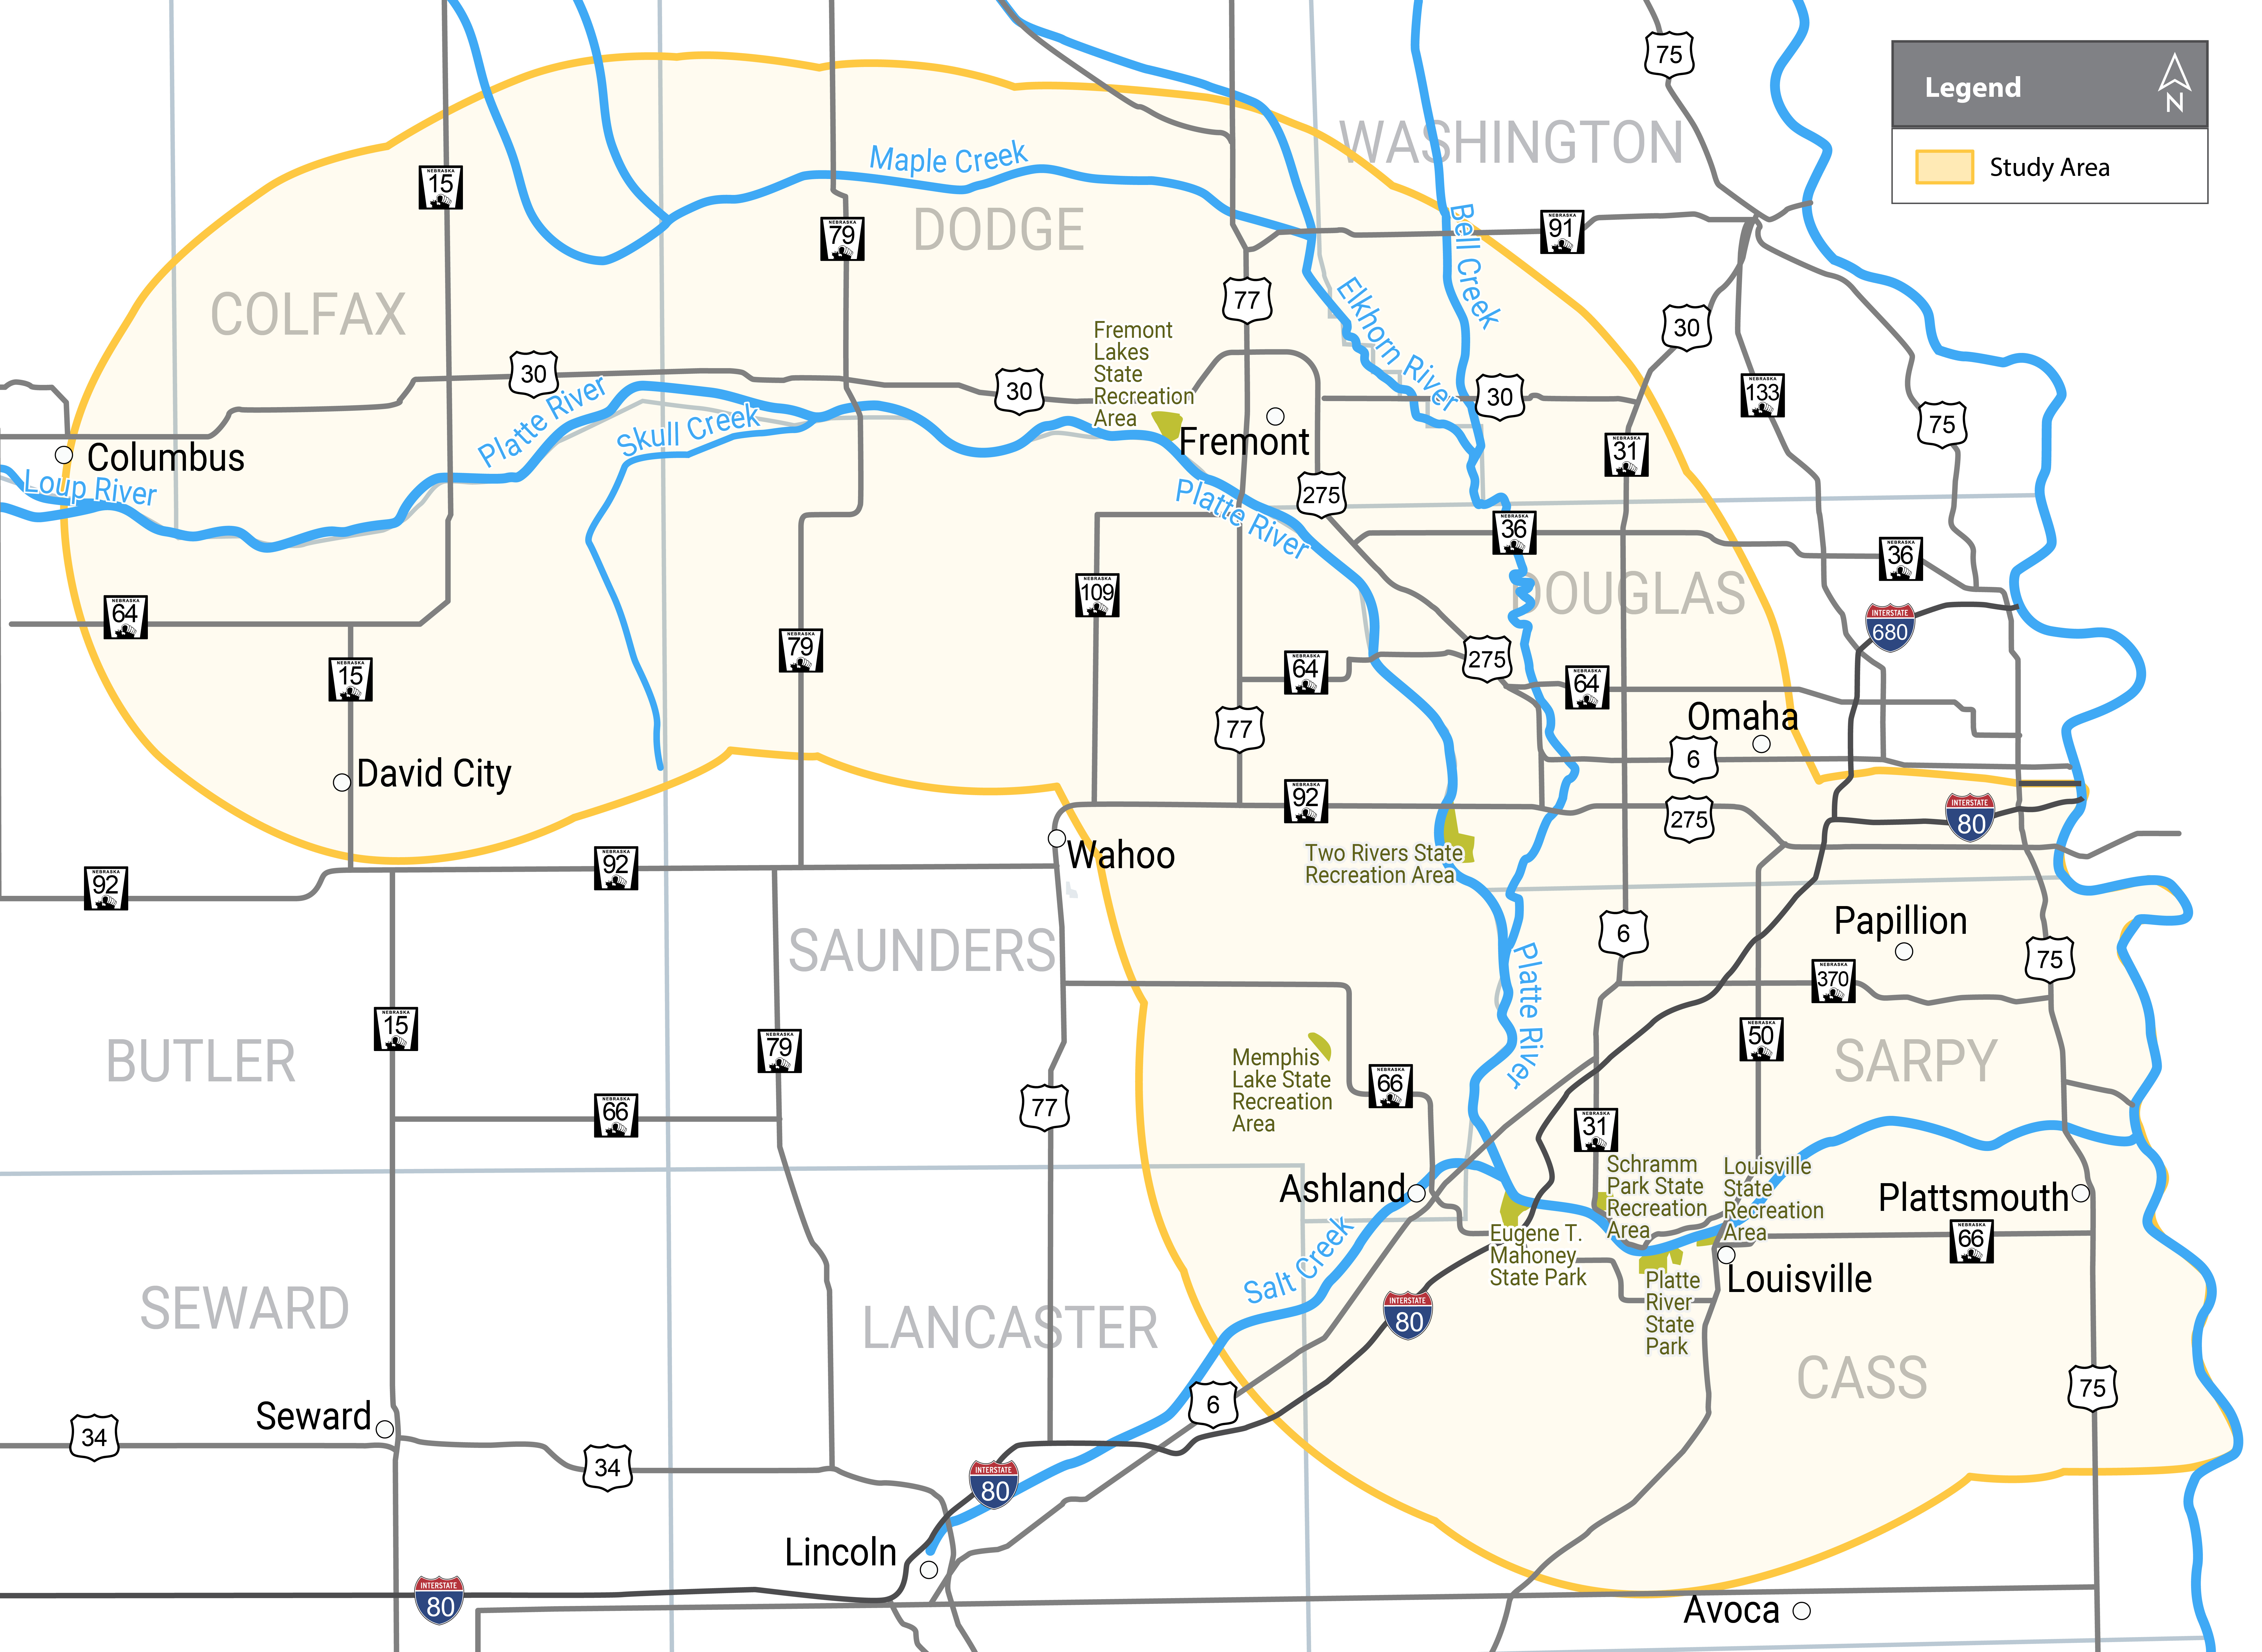 A map of the study scope, which spans the length of the Platte River from Columbus to Plattsmouth, Nebraska. The map includes counties and major cities in the study area, including Columbus, Fremont, Omaha, Papillion, Ashland, Louisville and Plattsmouth. Some Nebraska State Parks and State Recreation Areas are also highlighted on the map, including Mahoney State Park, Platte River State Park, Schramm Park State Recreation Area, Louisville State Recreation Area, Two Rivers State Recreation Area and Fremont Lakes State Recreation Area. 